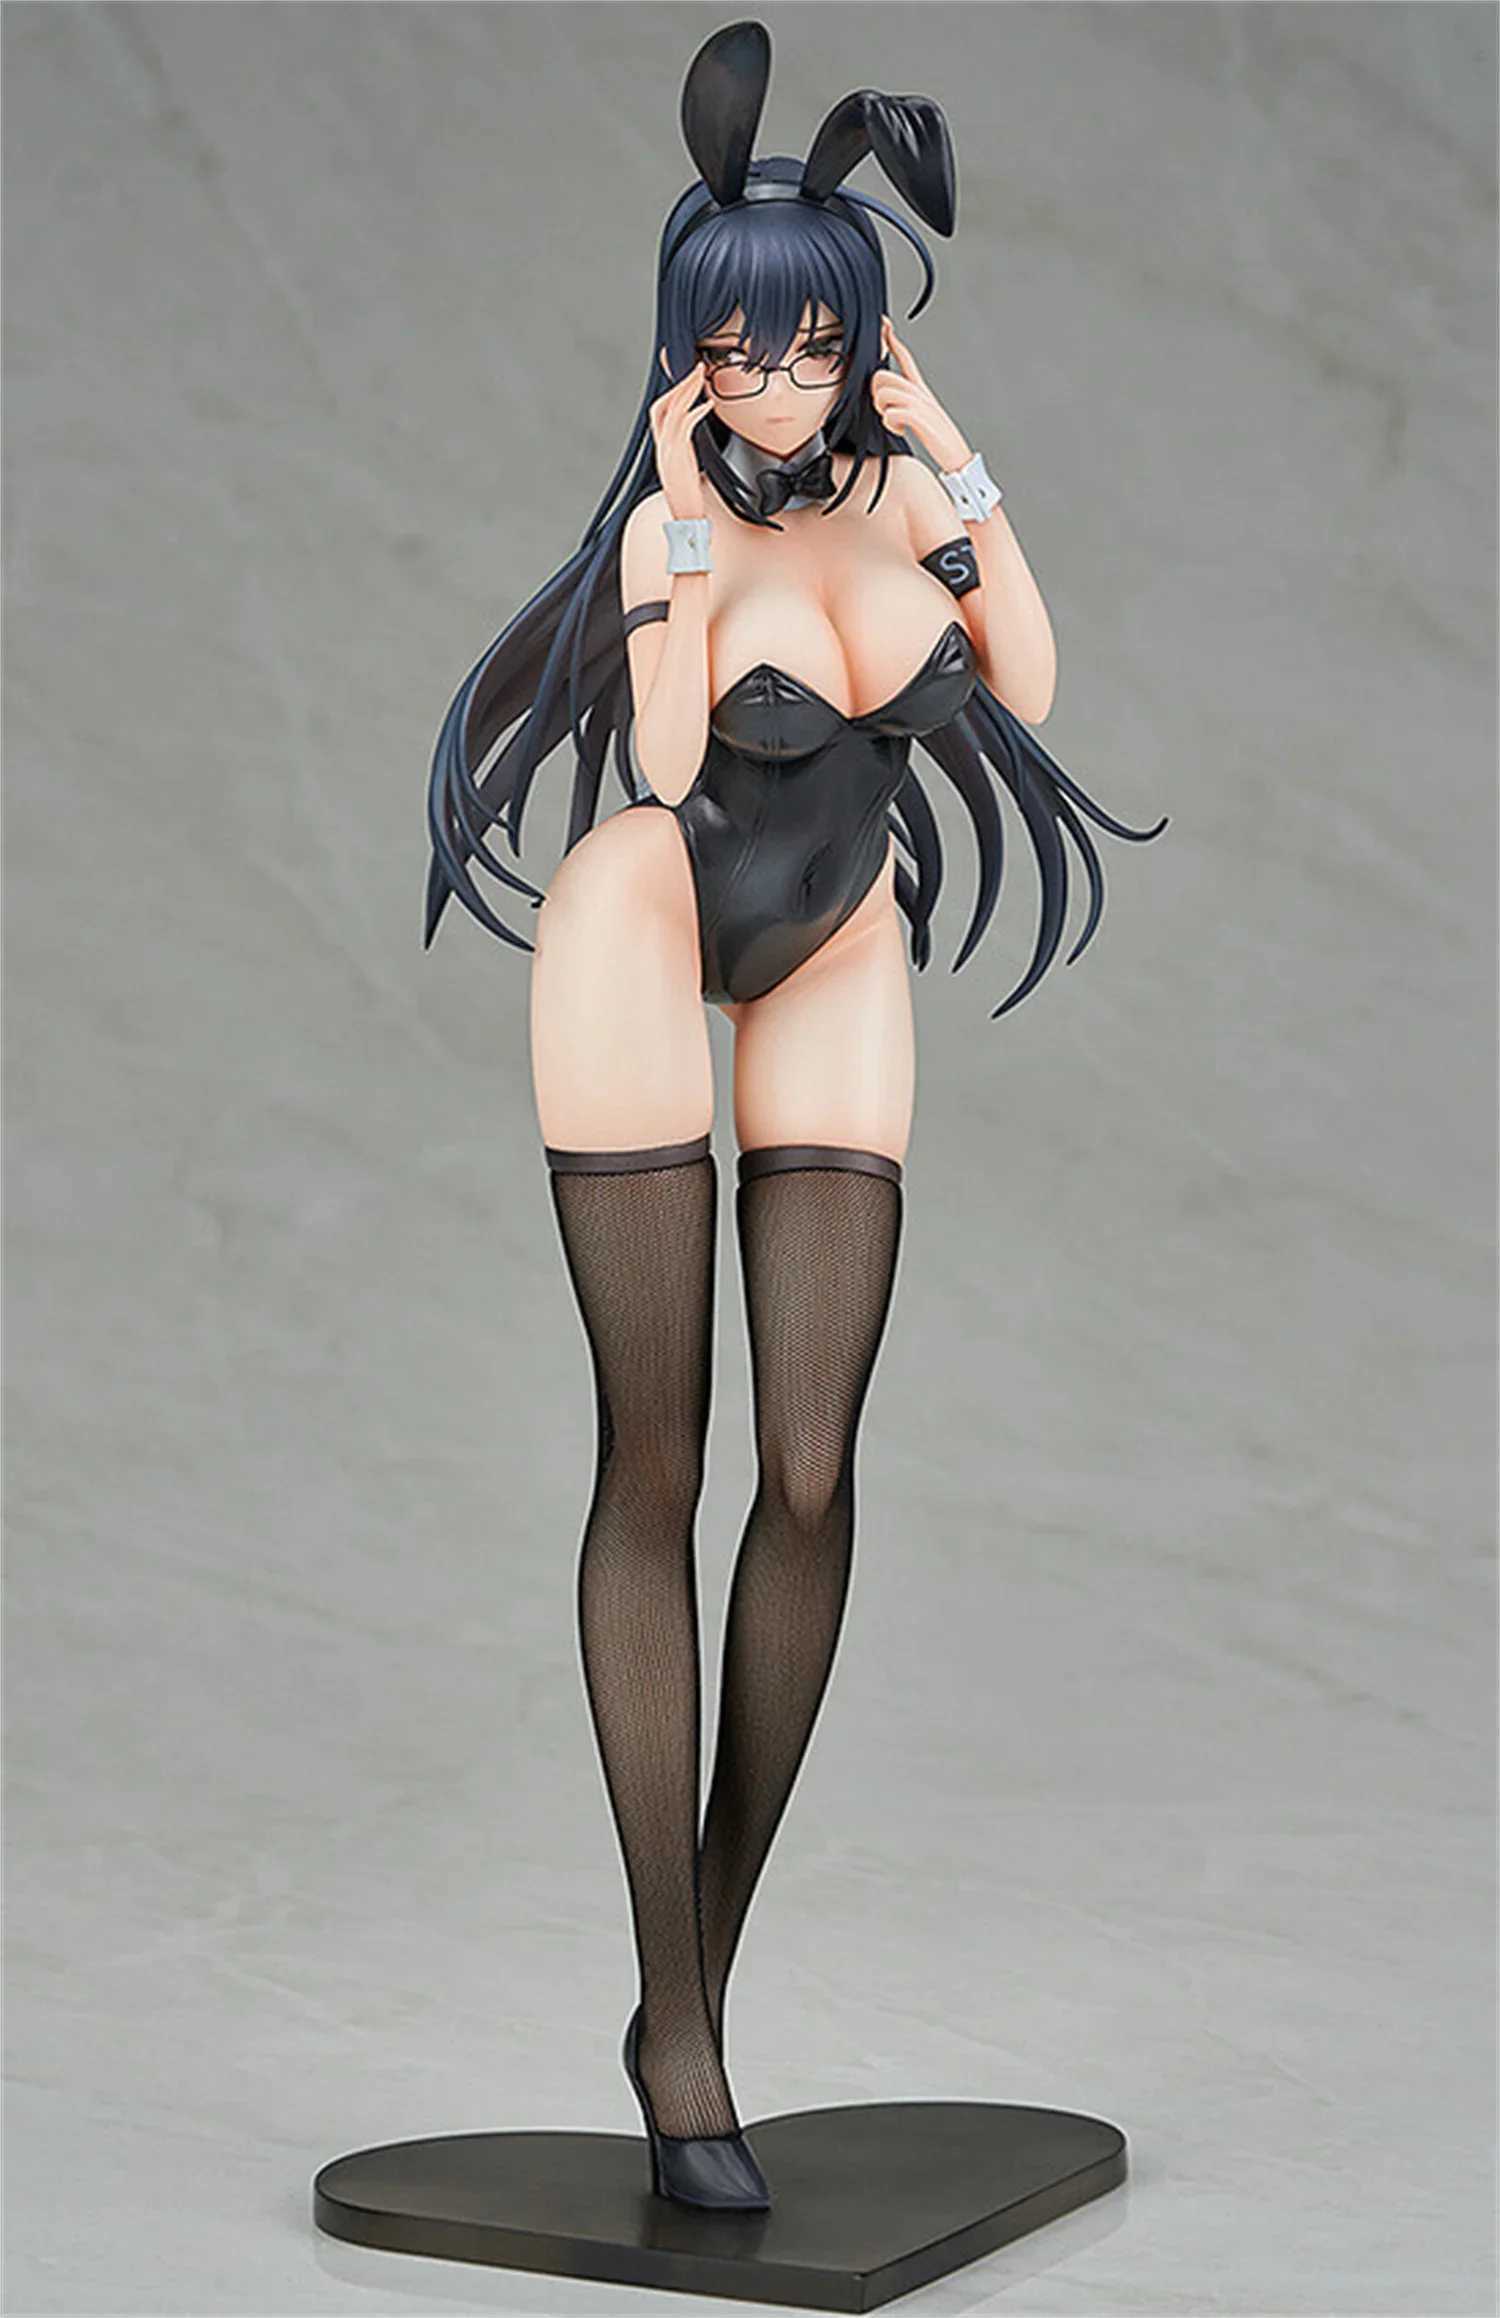 Action Toy Figures 30cm nsfw Black Bunny Aoi Sexy Nude Girl Modèle PVC ANIME Figure d'action Modèle de collection adulte Toys Hentai Doll Friend Gift Y240425ang2